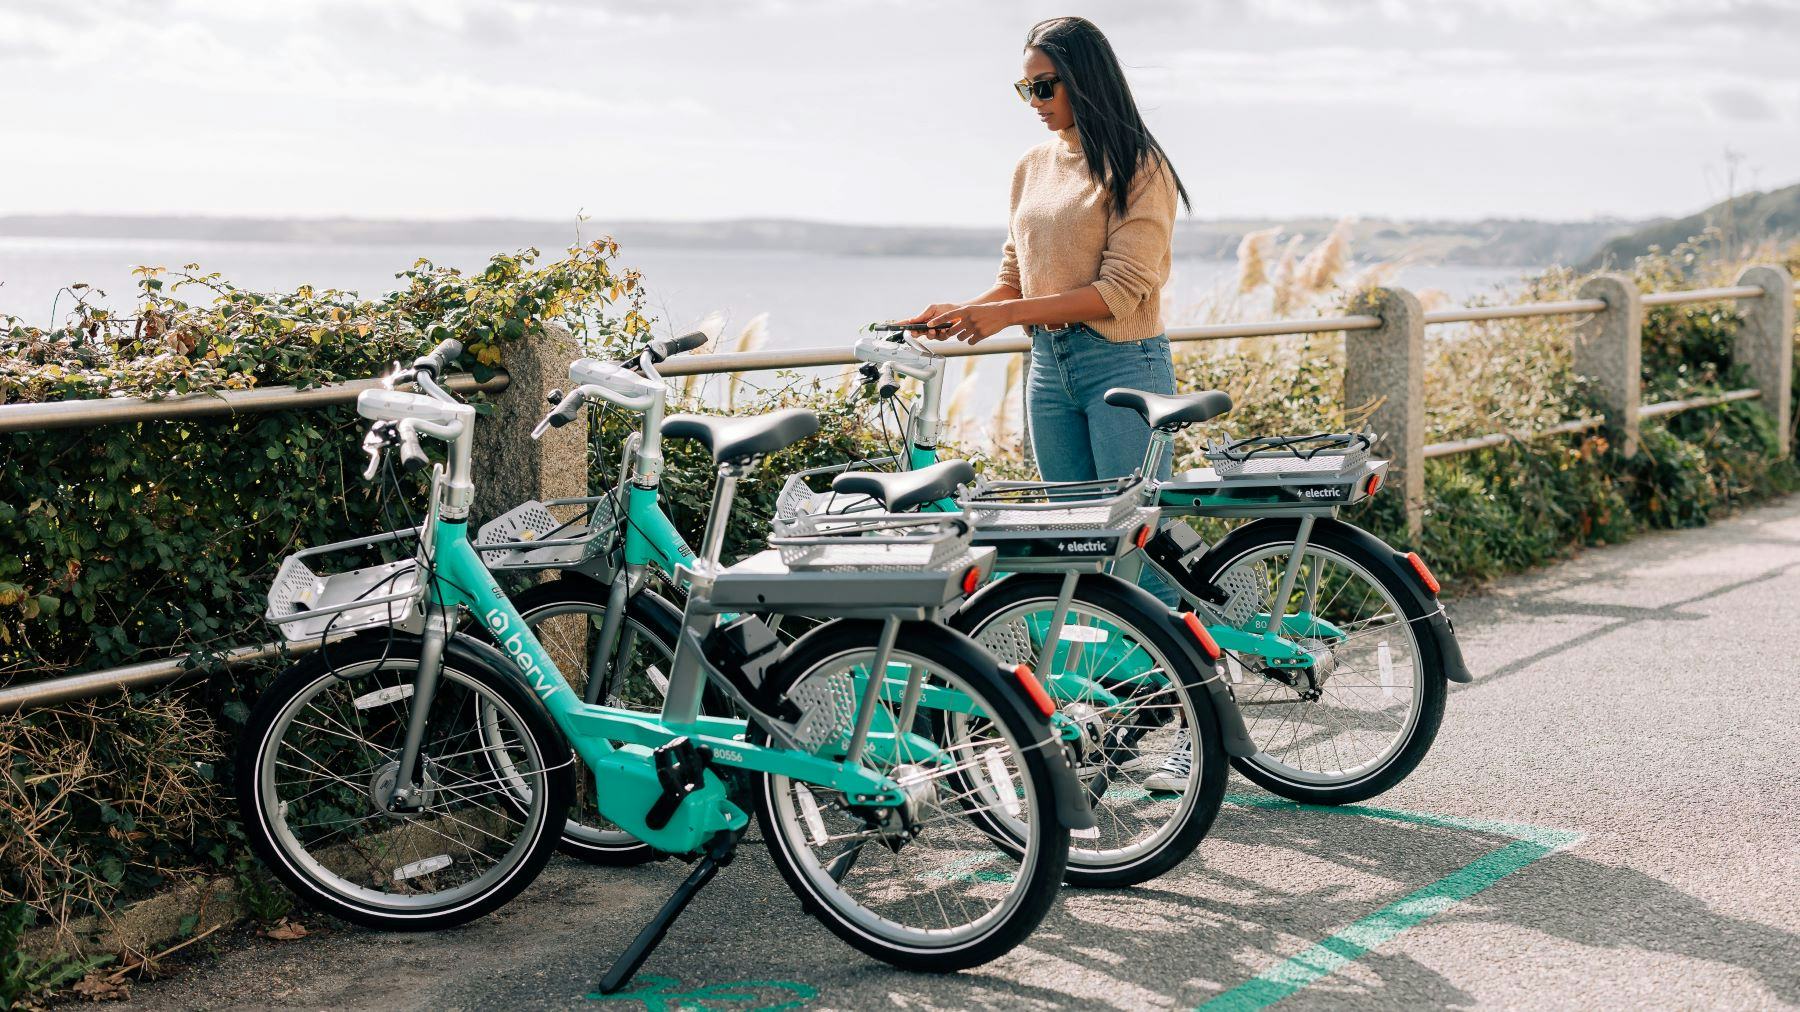 Beryl has a fleet of bikes, e-bikes, e-scooters and cargo bikes in several locations across the UK. – Photo Beryl